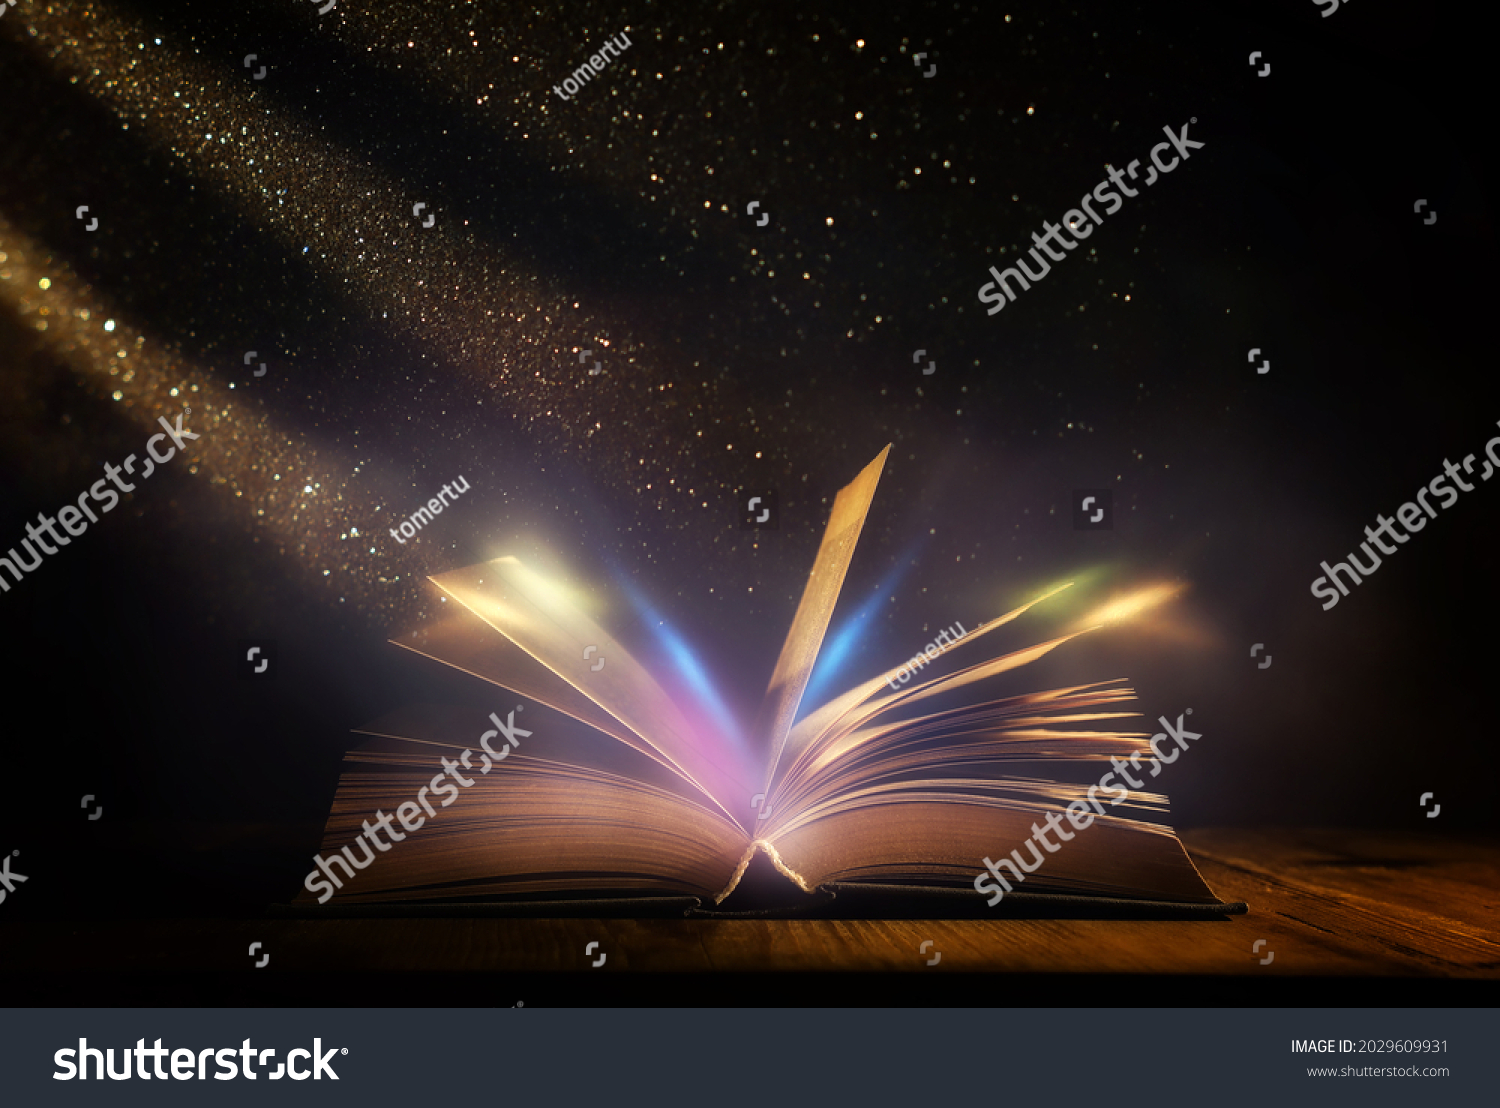 Magical image of open antique book over wooden table with glitter lights #2029609931